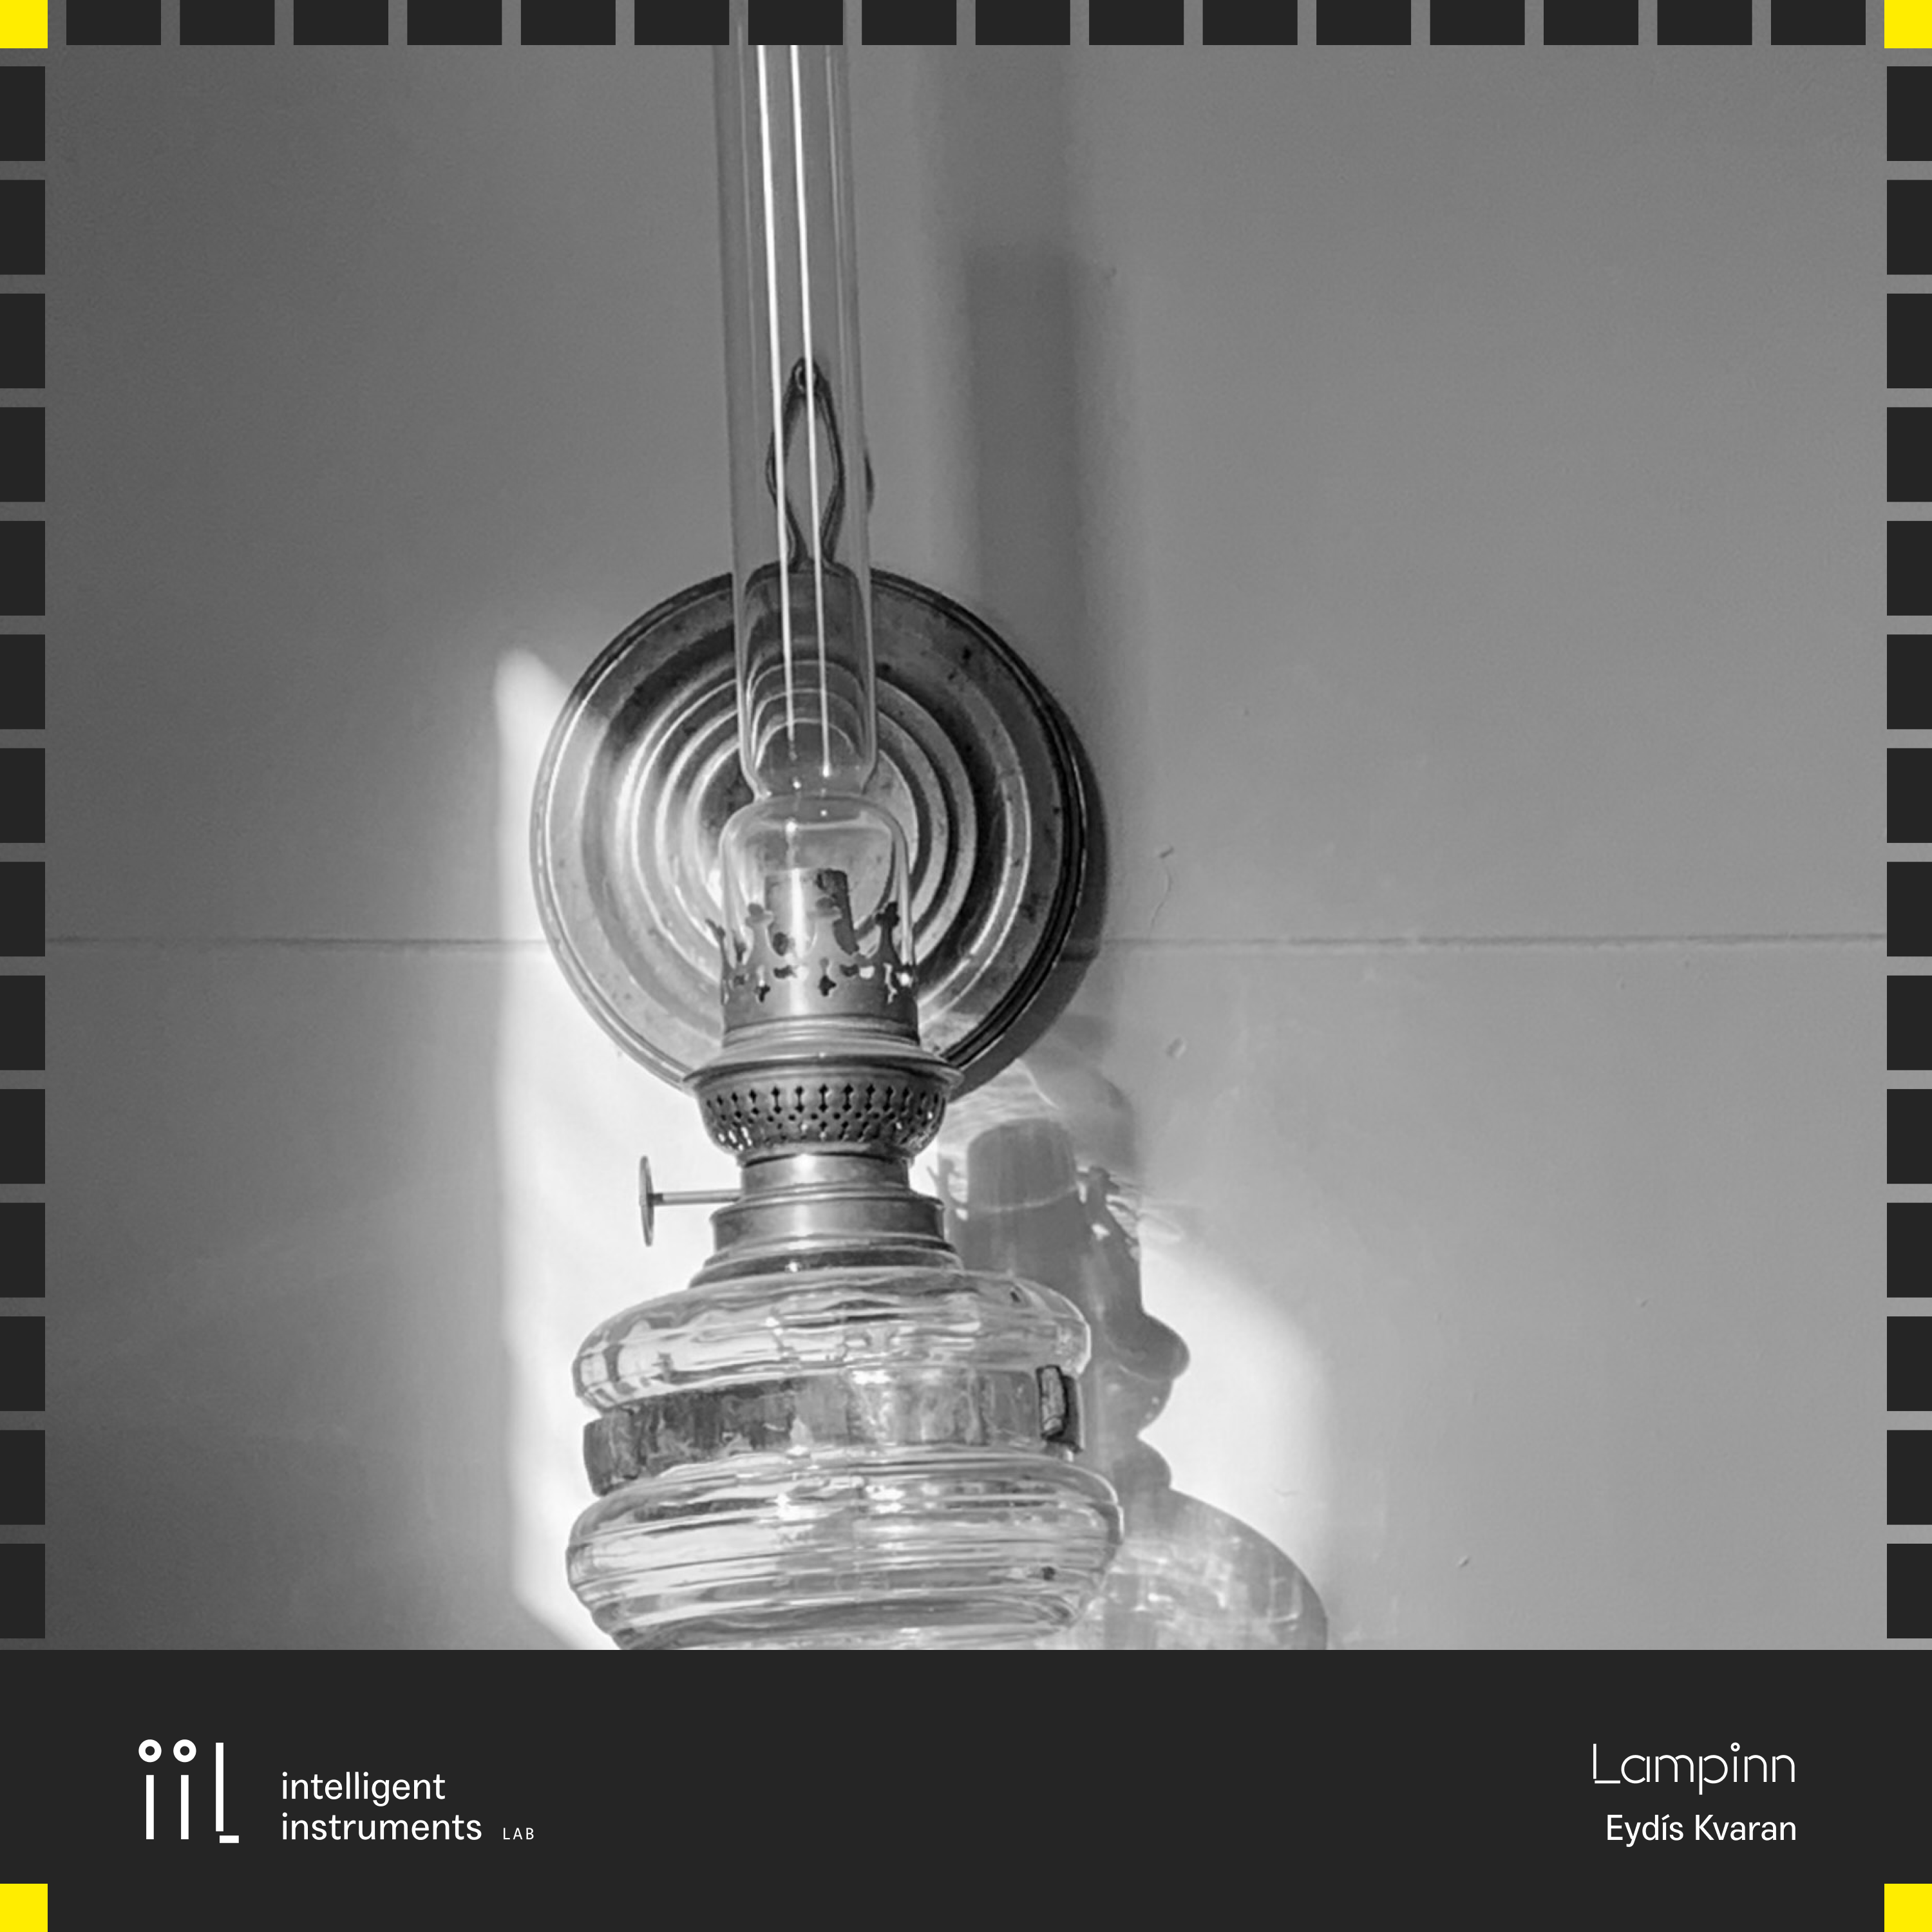 A black and white picture of an oil lamp on a wall, with the release frame